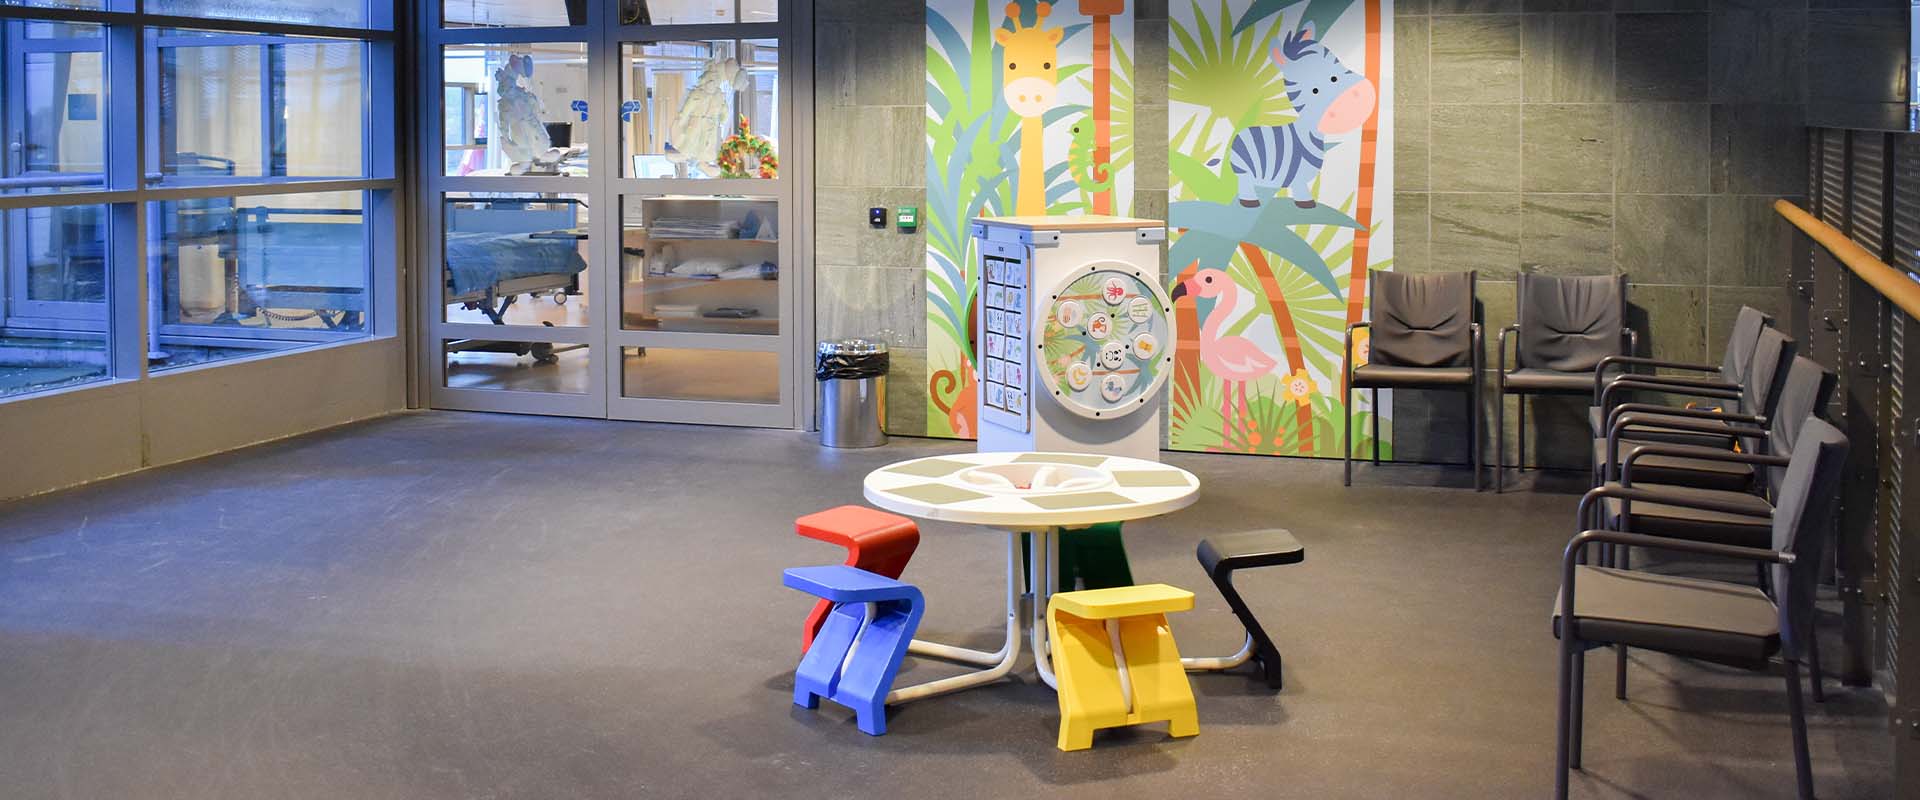 The advantages of a kids corner in your hospital